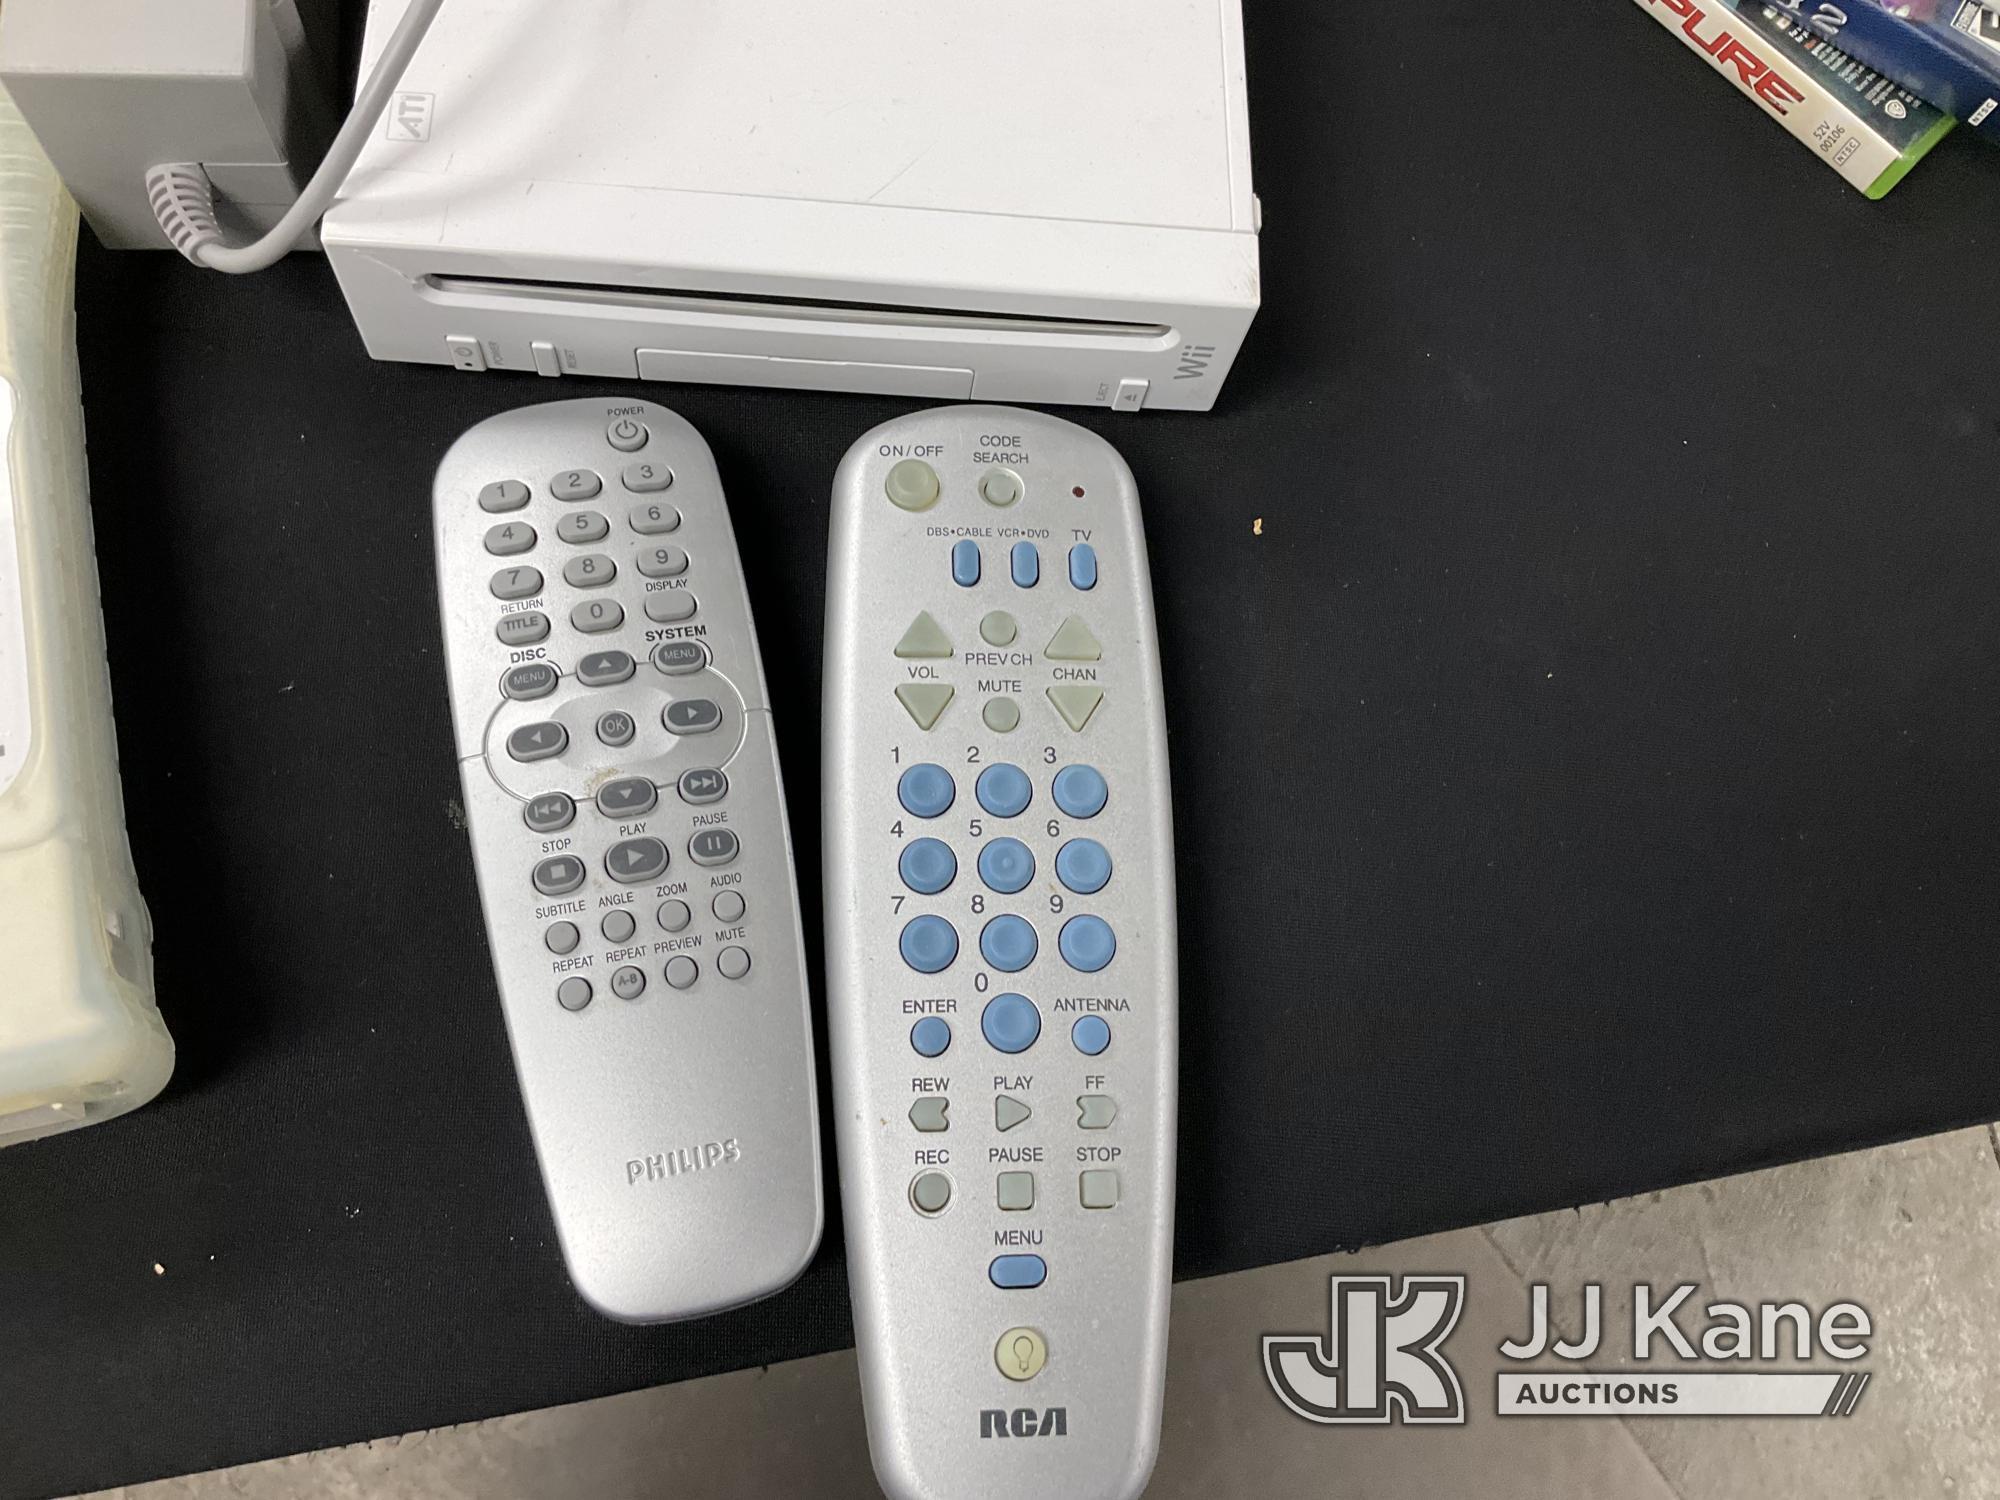 (Jurupa Valley, CA) Nintendo Wii With Accessories (Used) NOTE: This unit is being sold AS IS/WHERE I